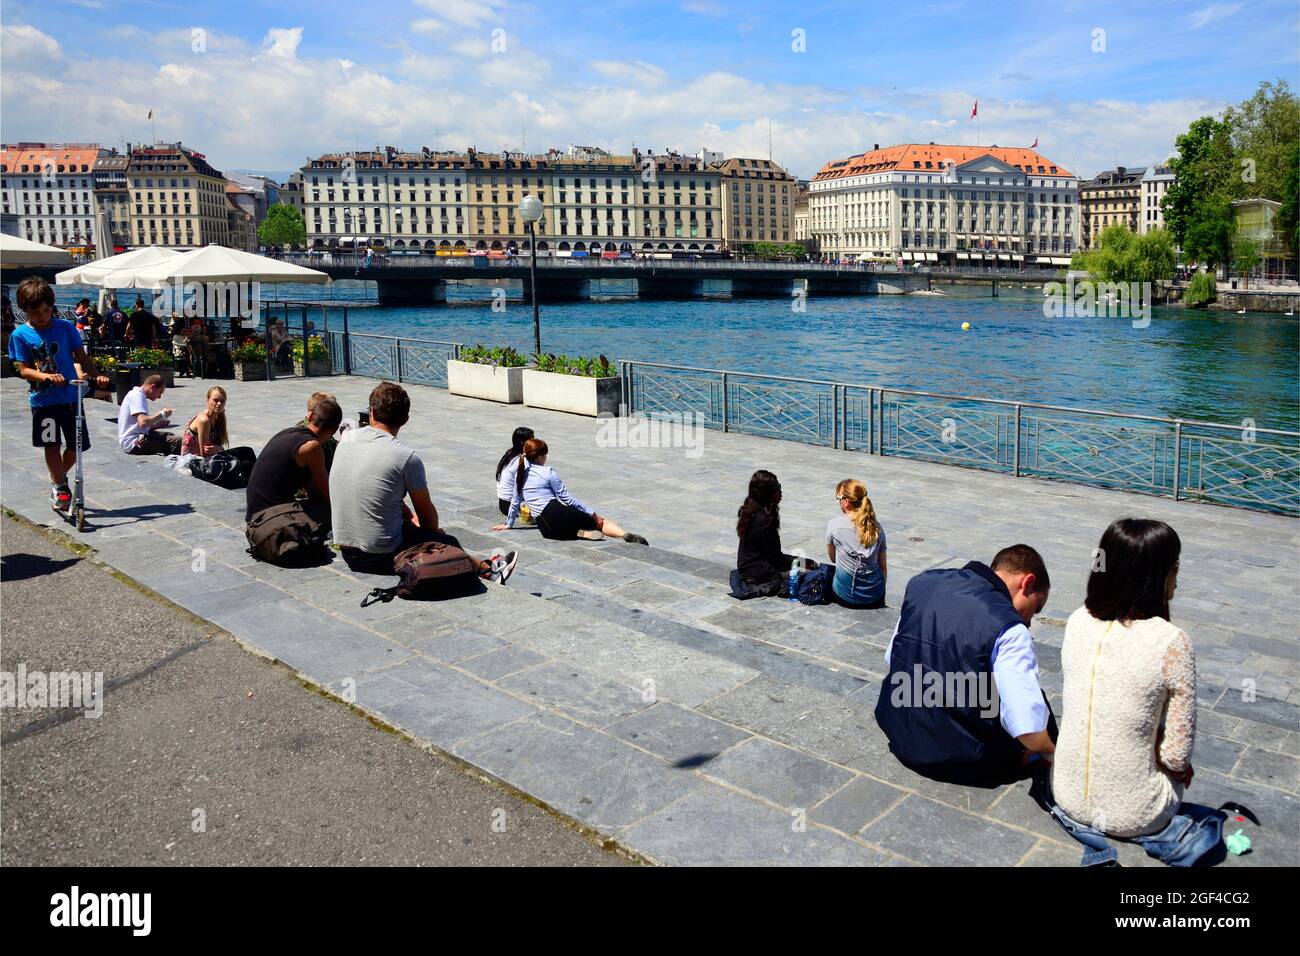 People resting on terraces on bank of Rhone river, Promenade du Lac, on lef Pont des Bergues( Bergues bridge) connecting banks of river, on right Île Stock Photo